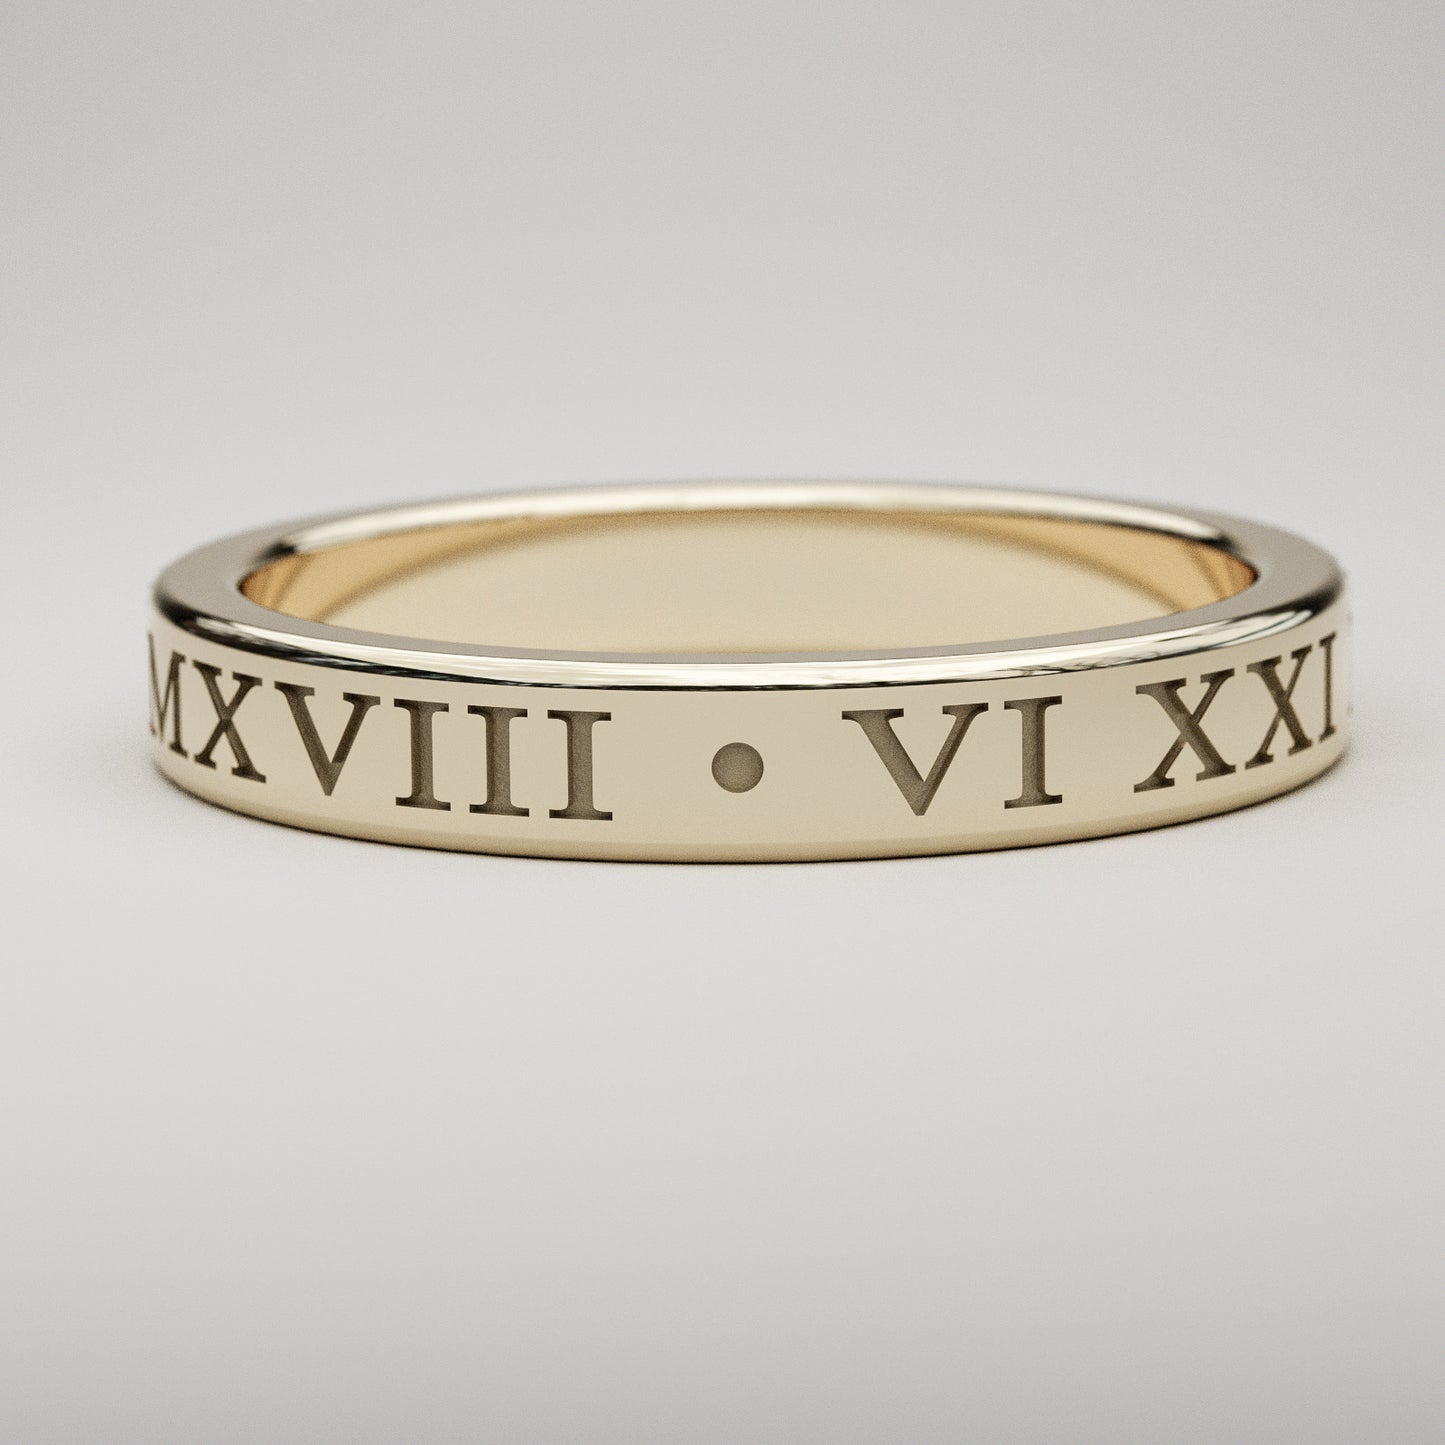 Custom date Roman Numeral ring in 14k yellow gold